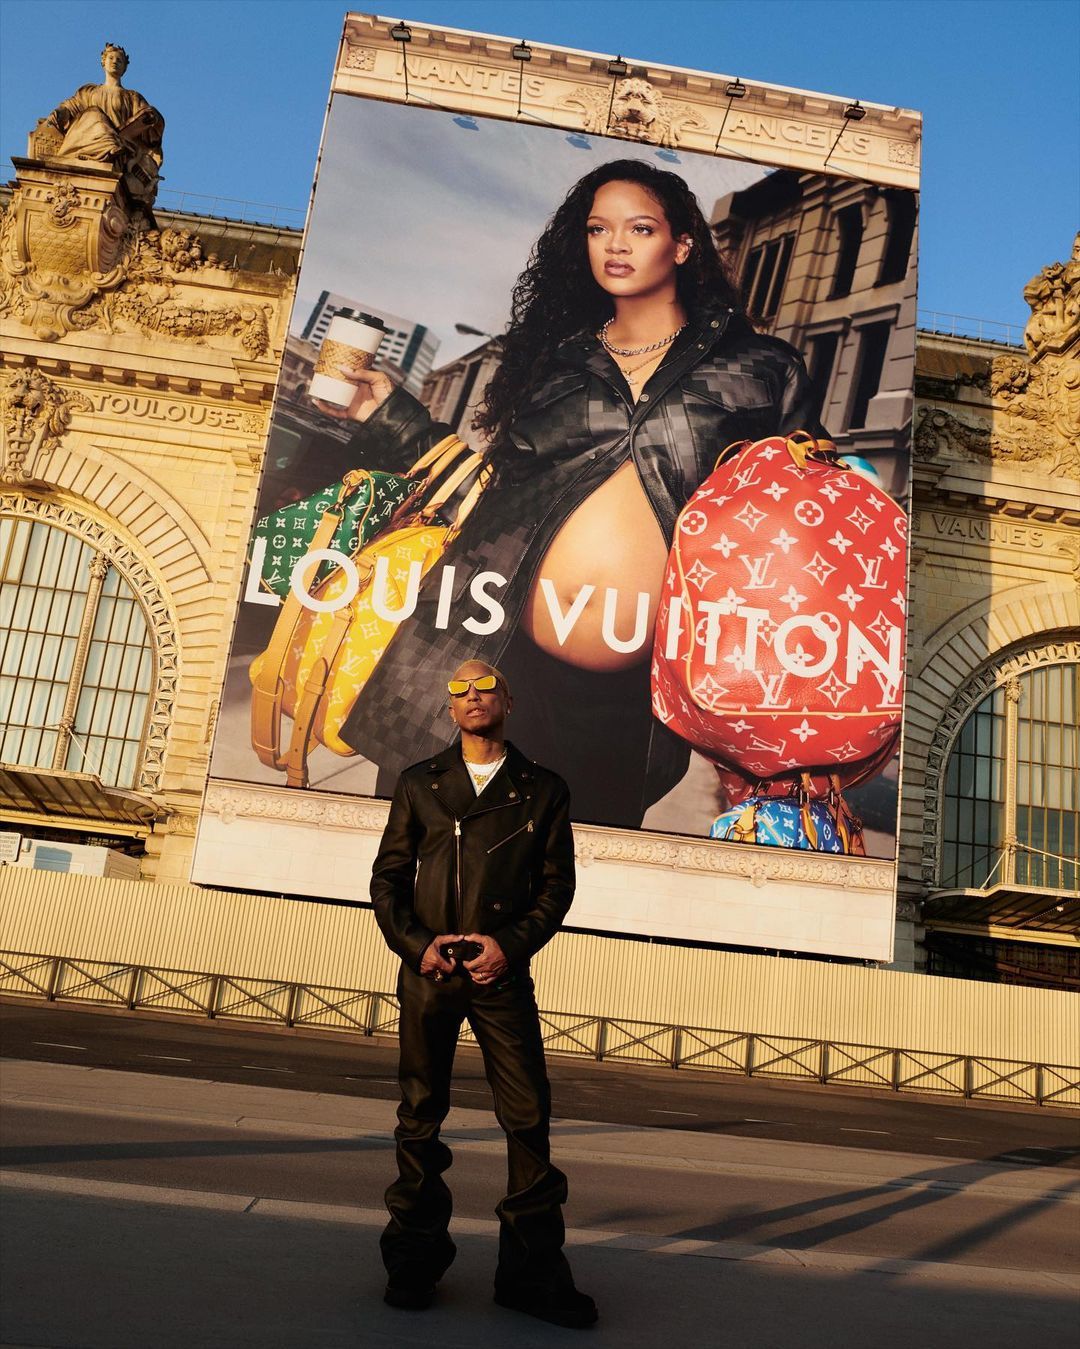 Louis Vuitton launches global ad contest